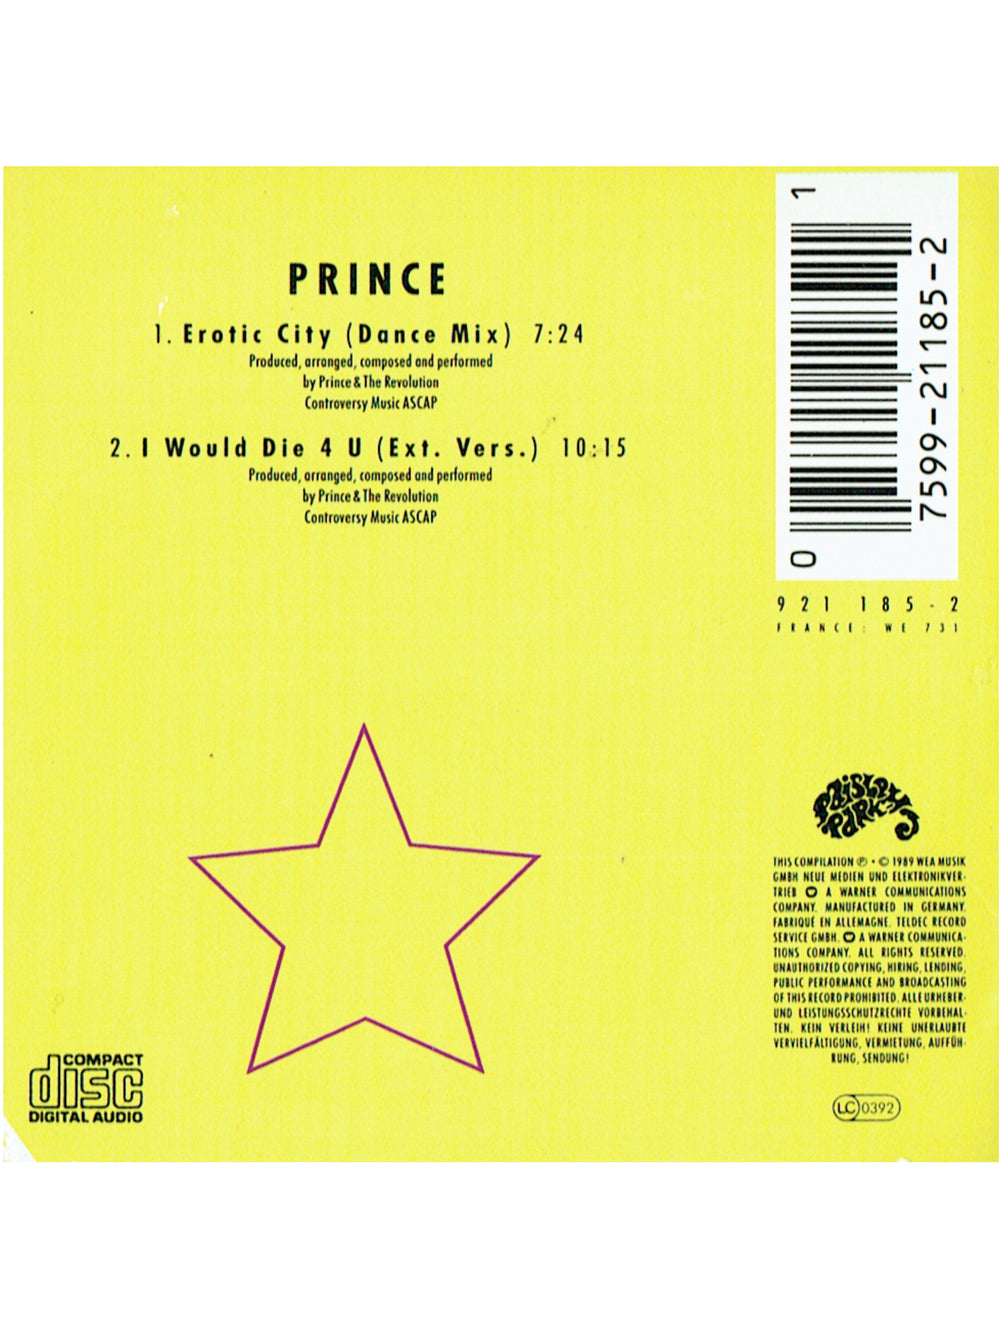 Prince Erotic City Dance Mix I Would Die 4 U Ext 3 Inch CD Single In Original Clam Pack SMS